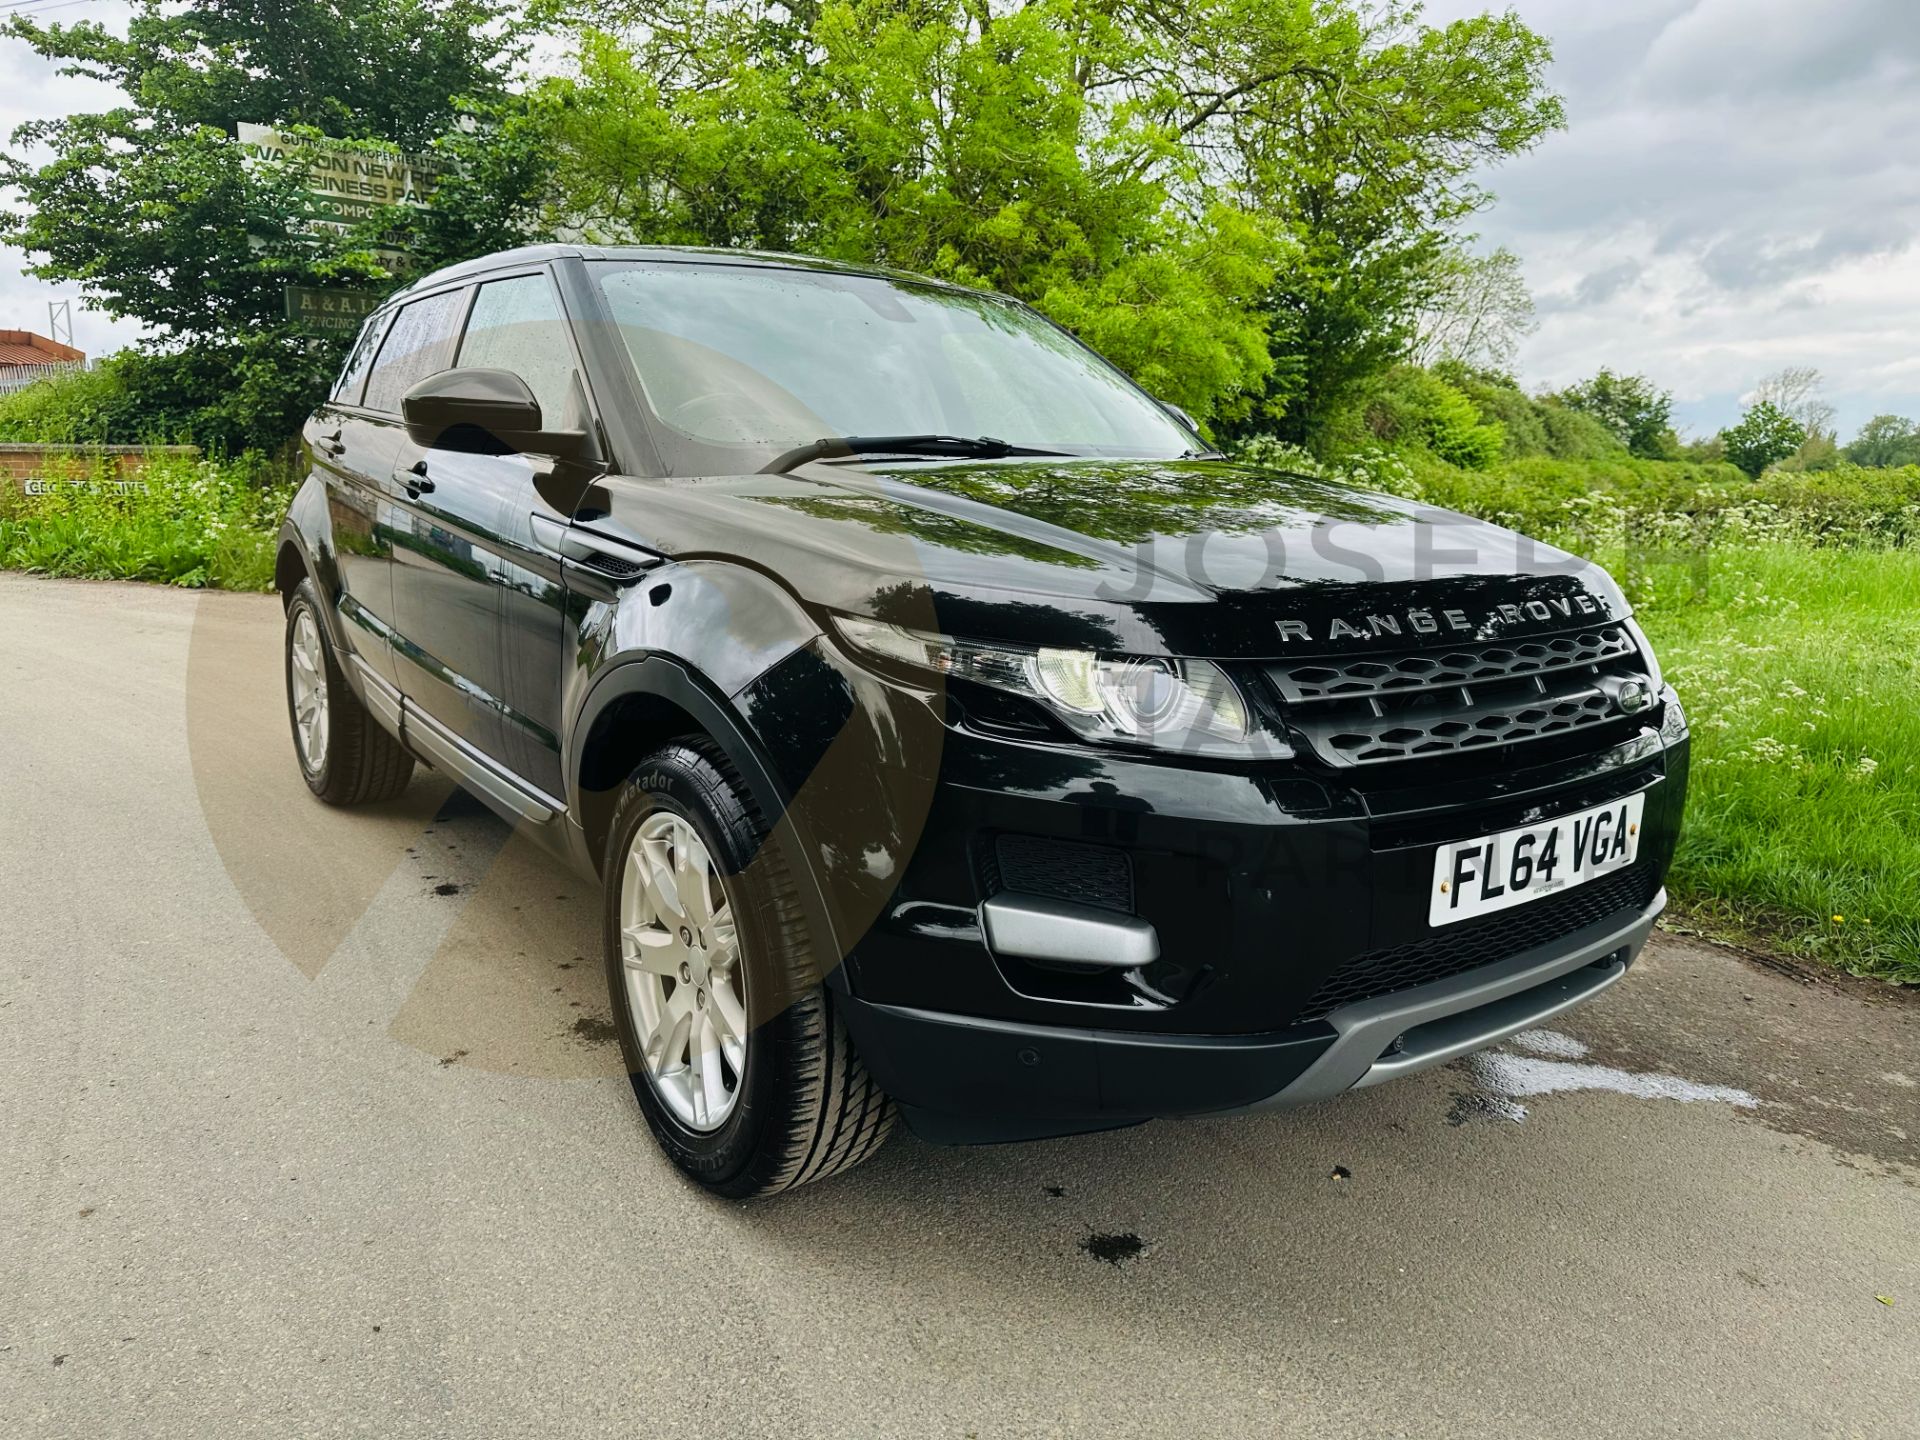 (ON SALE) RANGE ROVER EVOQUE 2.2 ED4 *PURE EDITION* - 2015 MODEL - START / STOP - LEATHER - Image 2 of 39